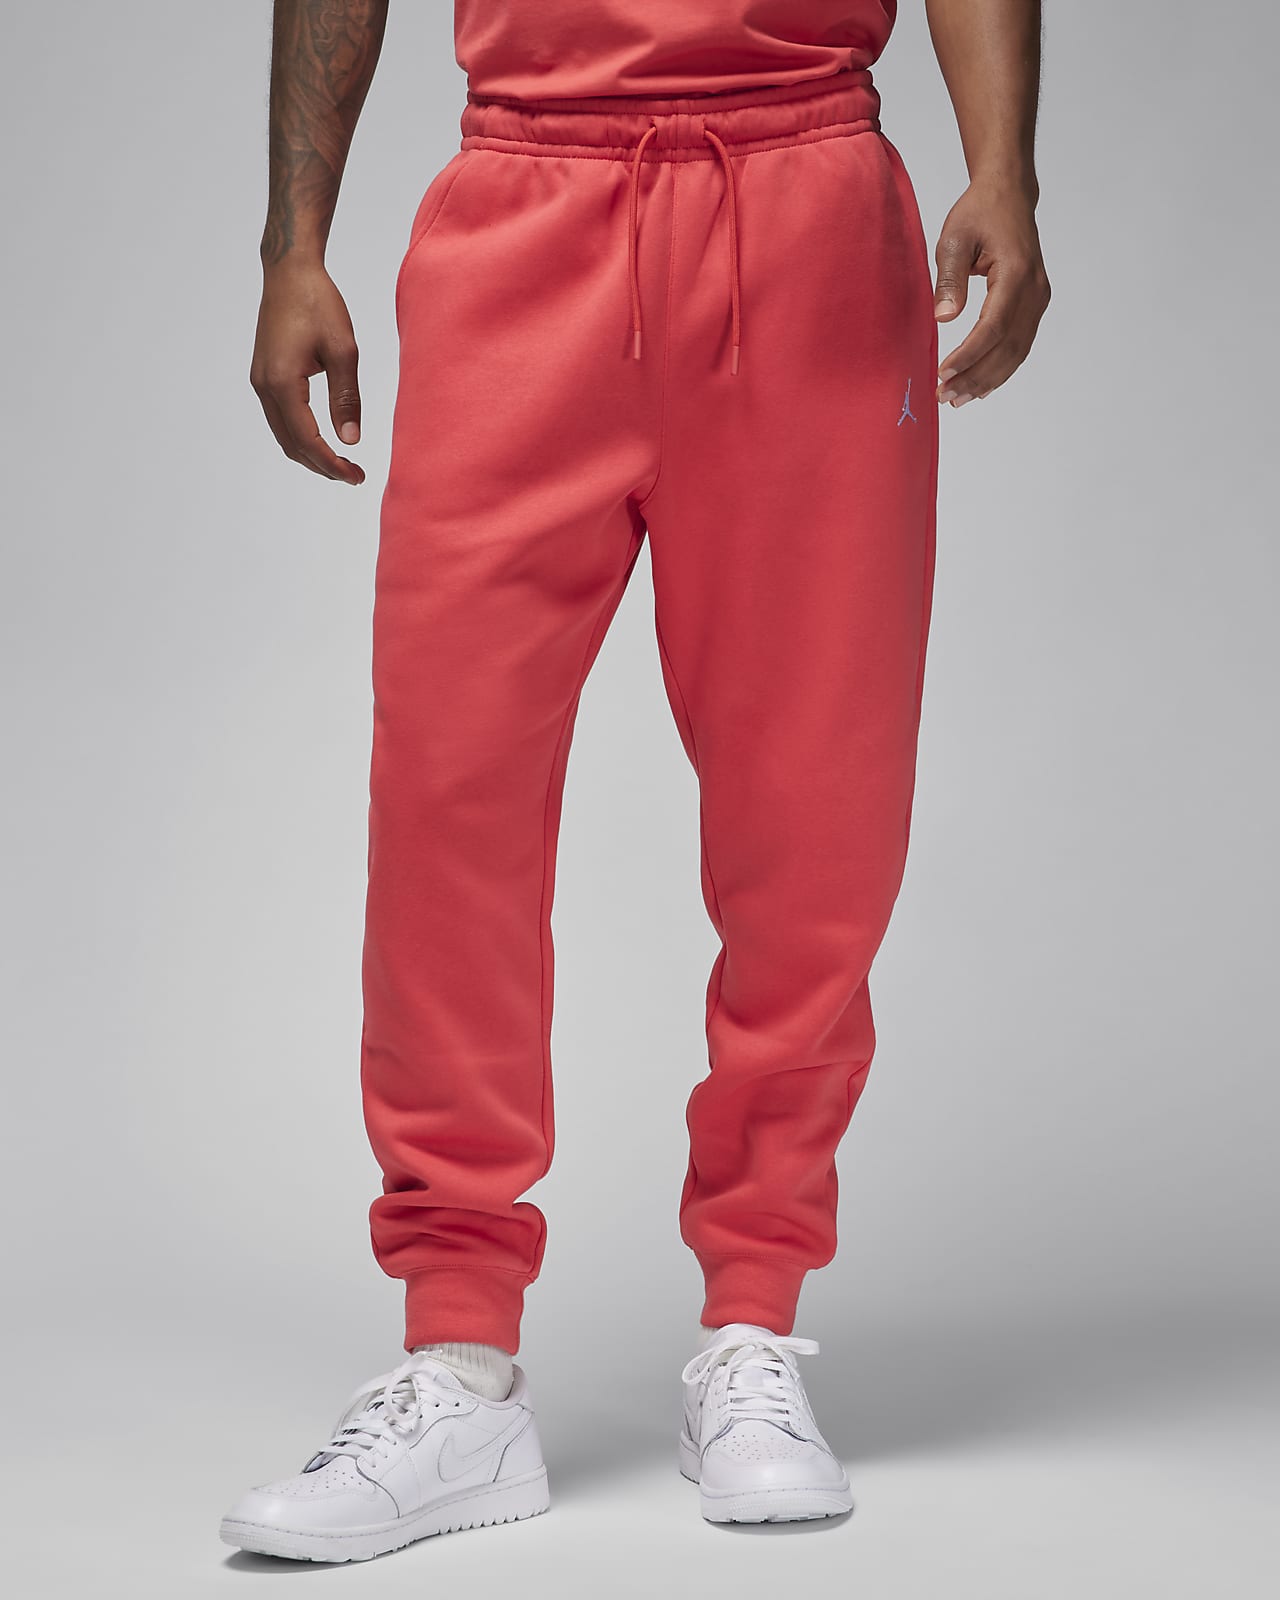 Men's red joggers with stars on the sides